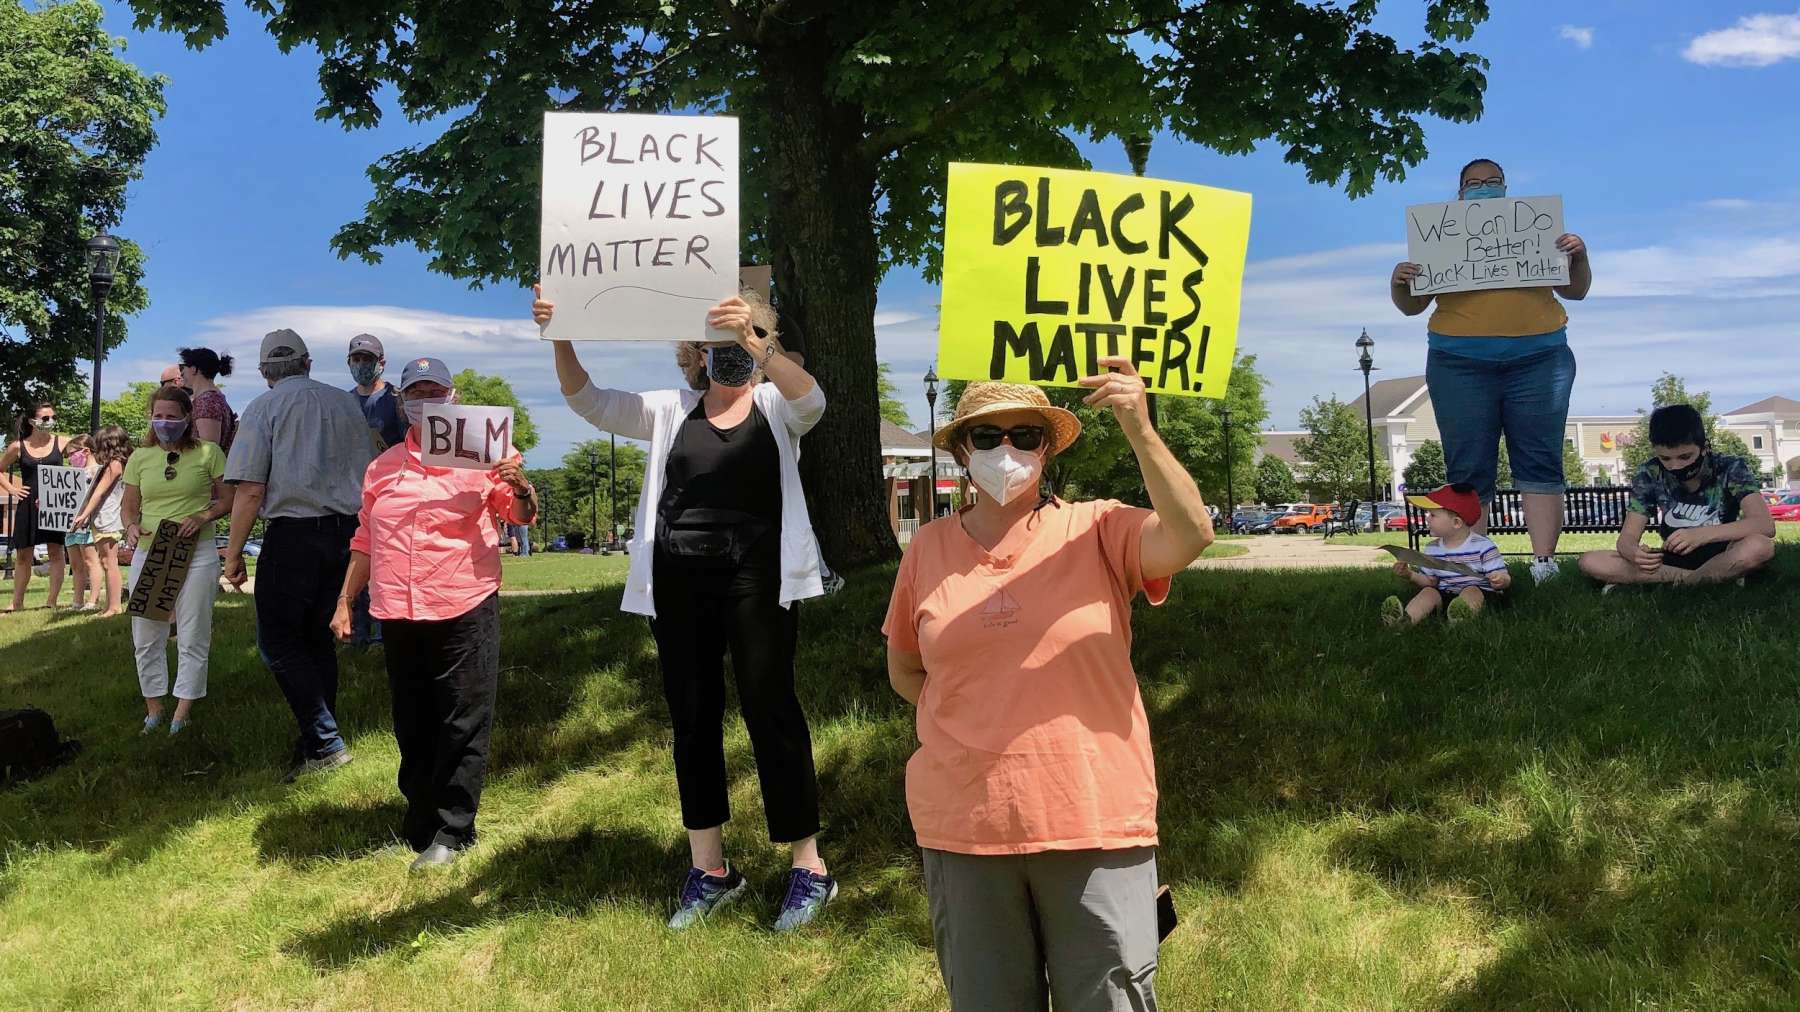 A second rally to support Black lives in North Kingstown